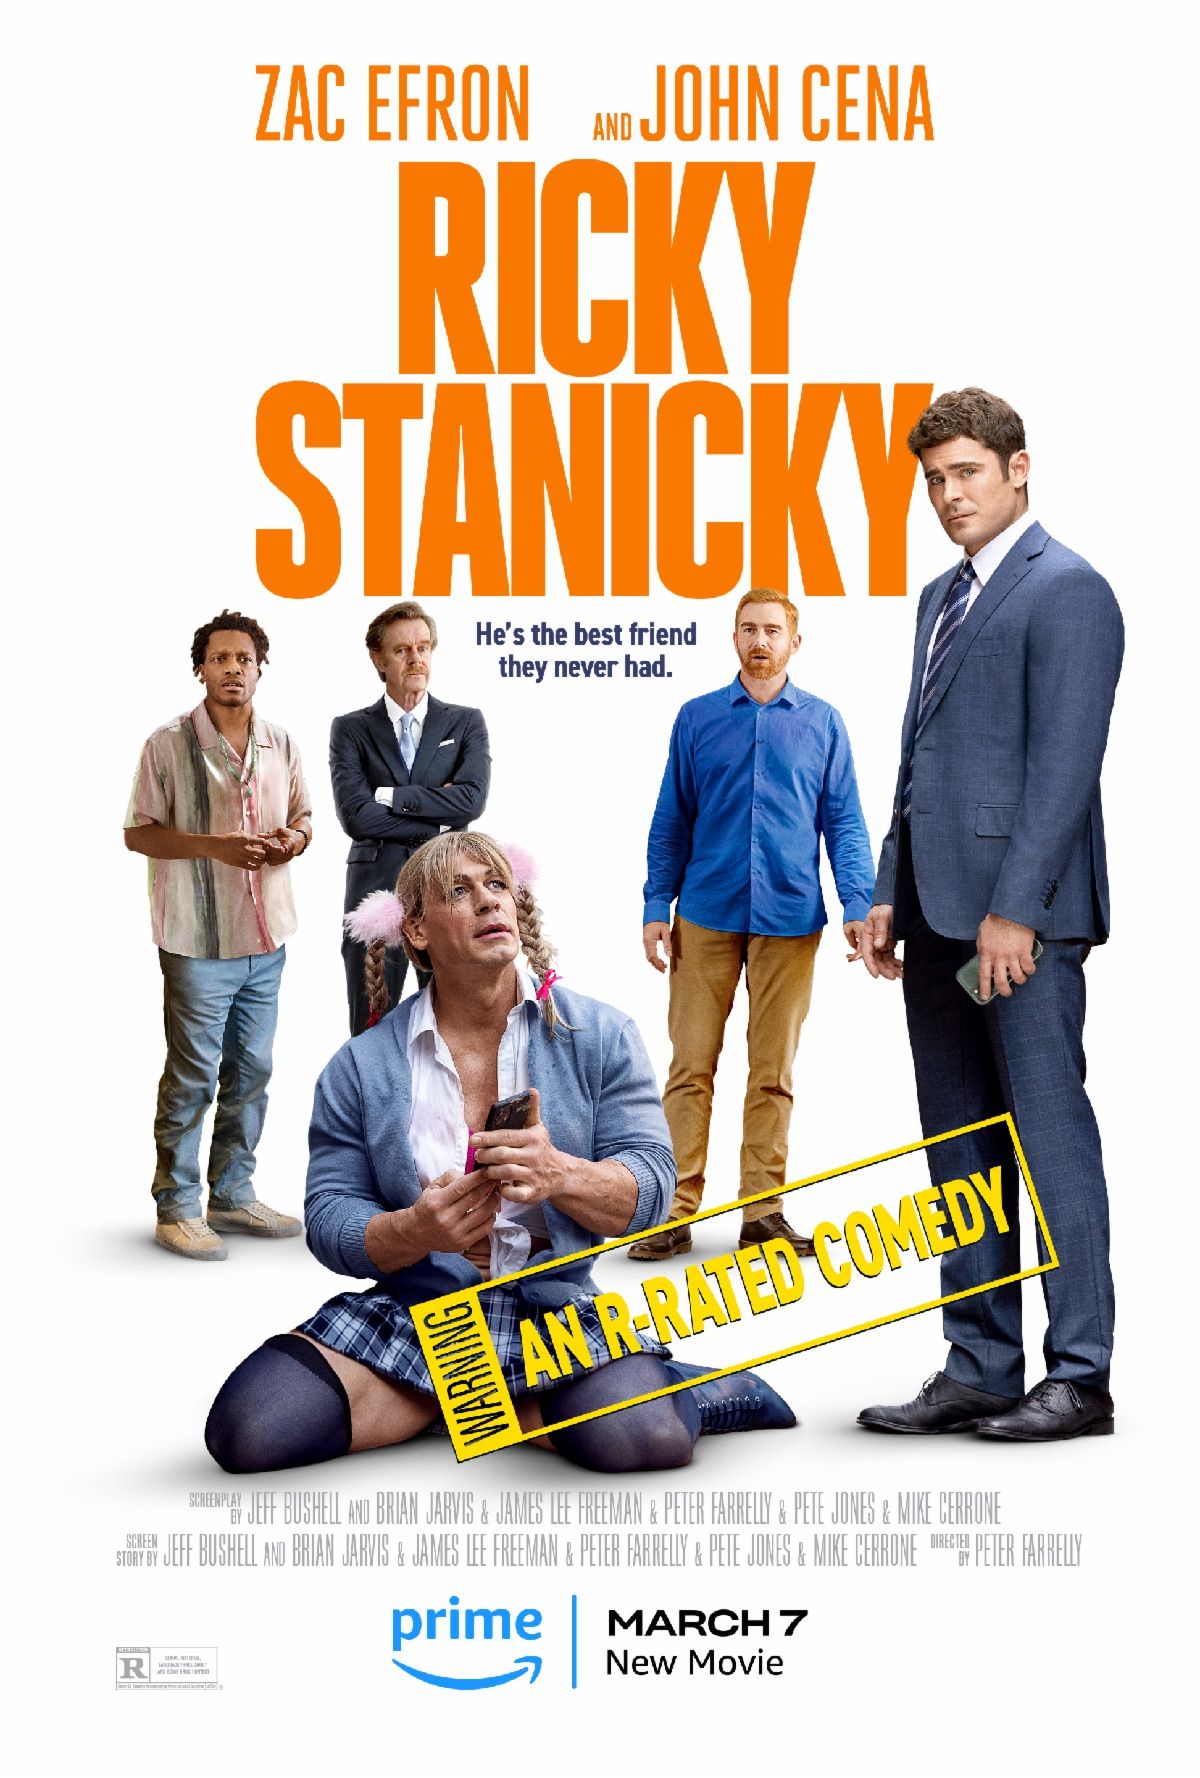 Ricky Stanicky Review: Zac Efron & John Cena Feel At Home In Raunchy, Heartfelt Prime Video Comedy